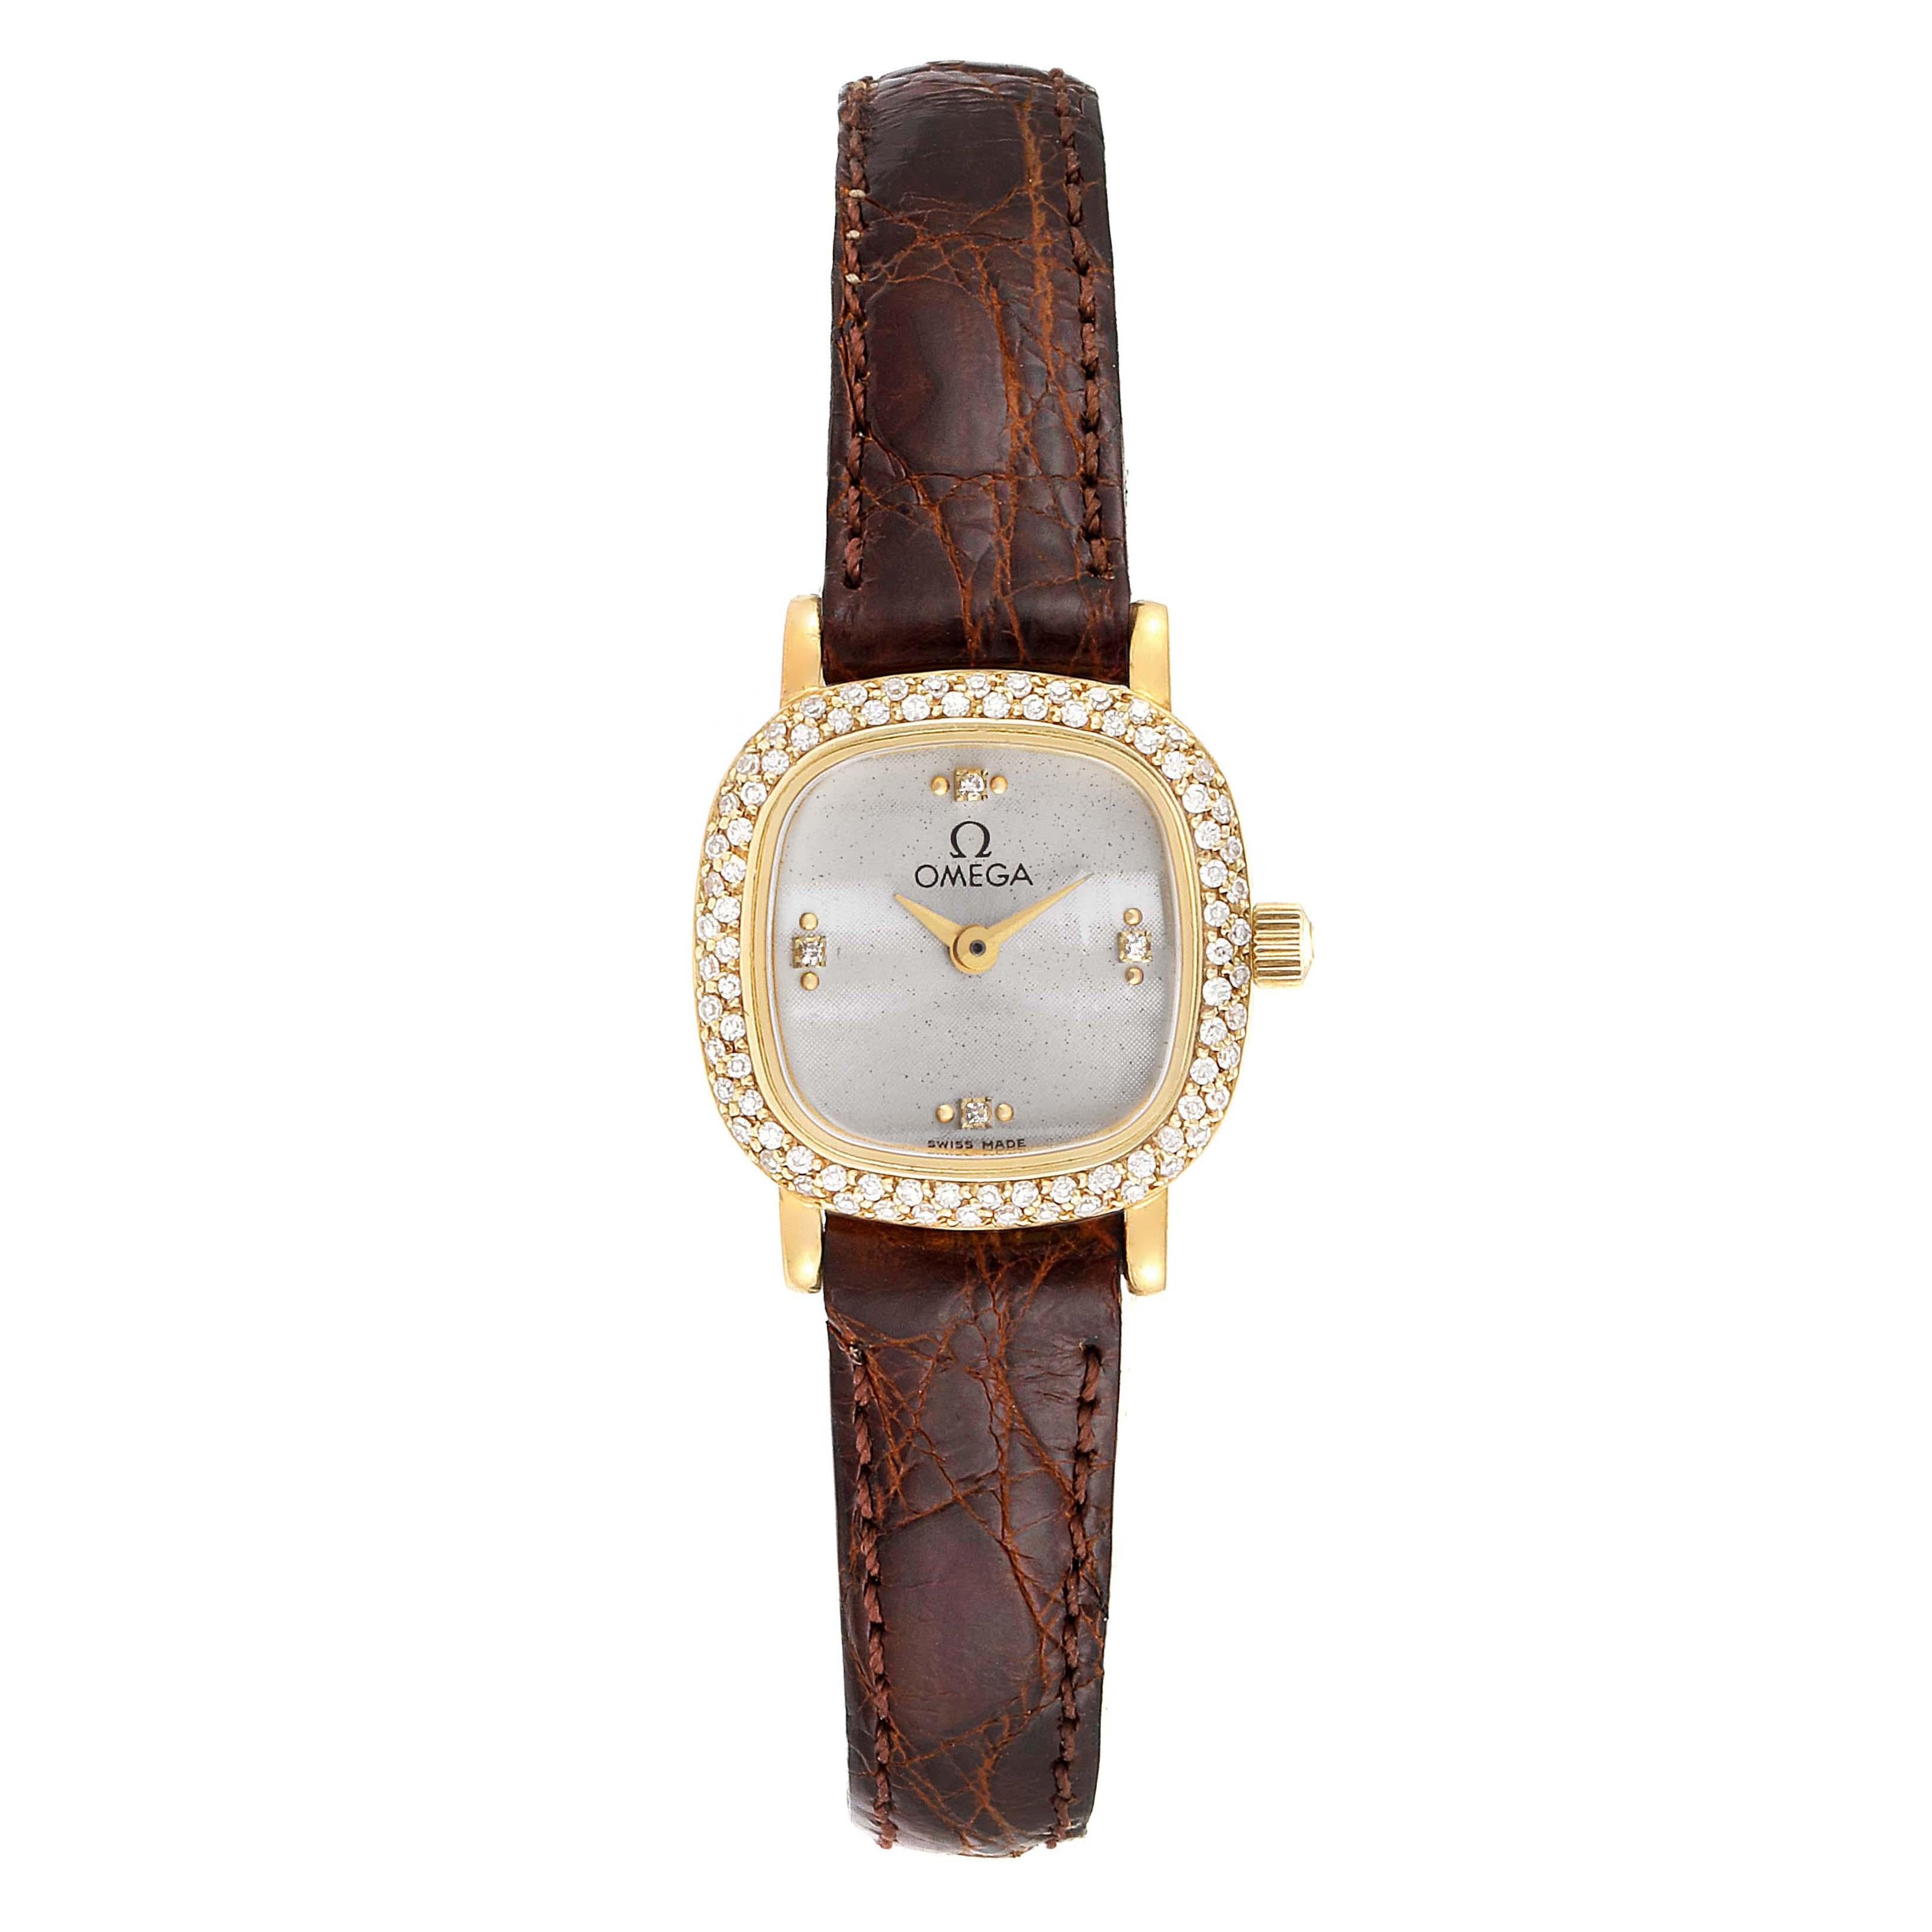 Omega DeVille Mini Yellow Gold Diamond Cocktail Ladies Watch 1450. Quartz movement. Yellow gold coushin case 18.5 x 18.5 mm. Yellow gold diamond bezel. Scratch-resistant sapphire crystal. Silver dial with diamond hour markers. Brown leather strap